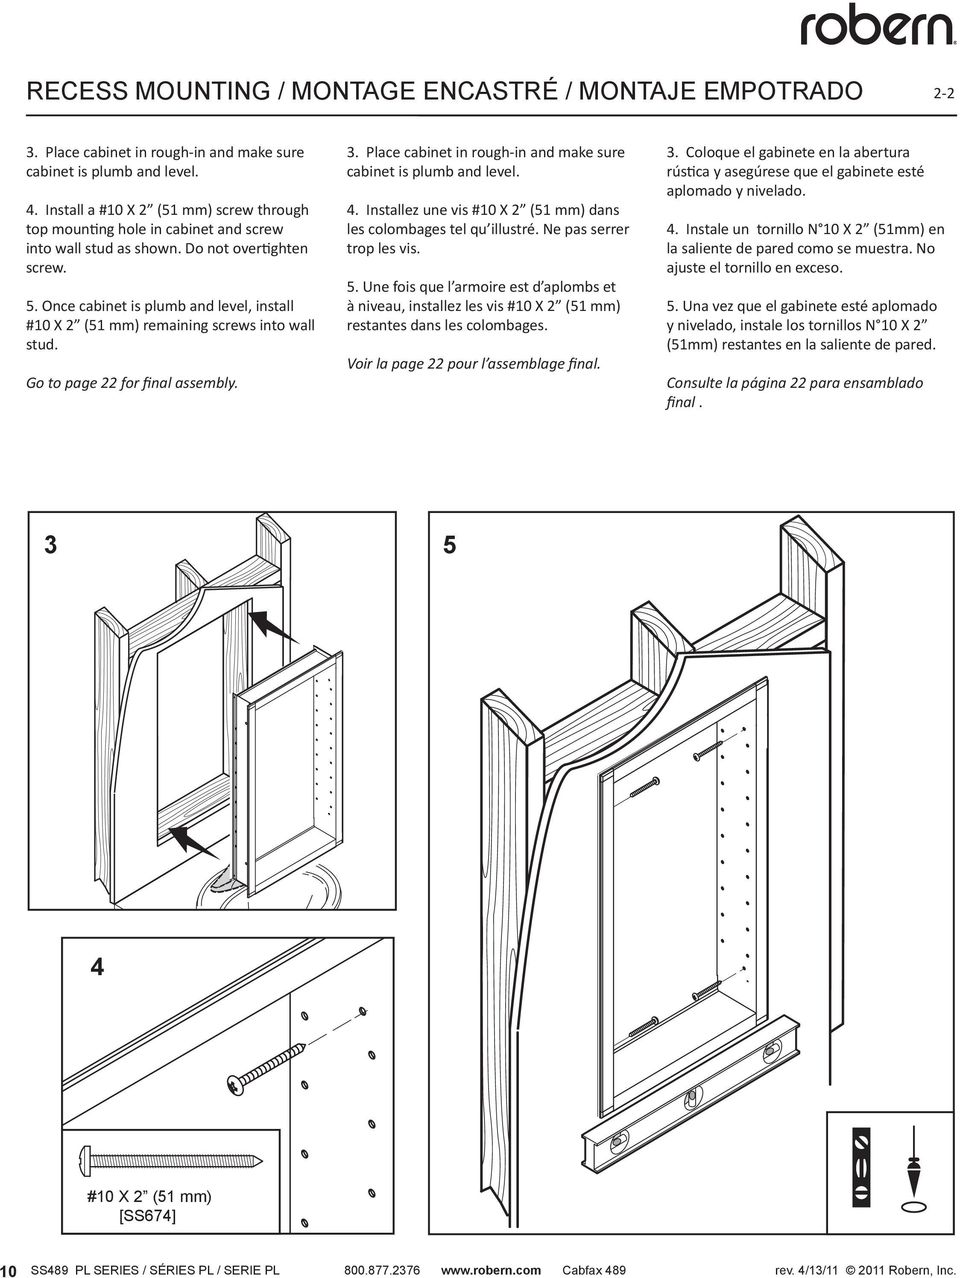 Once cabinet is plumb and level, install #10 X 2 (51 mm) remaining screws into wall stud. Go to page 22 for final assembly. 3. Place cabinet in rough-in and make sure cabinet is plumb and level. 4.